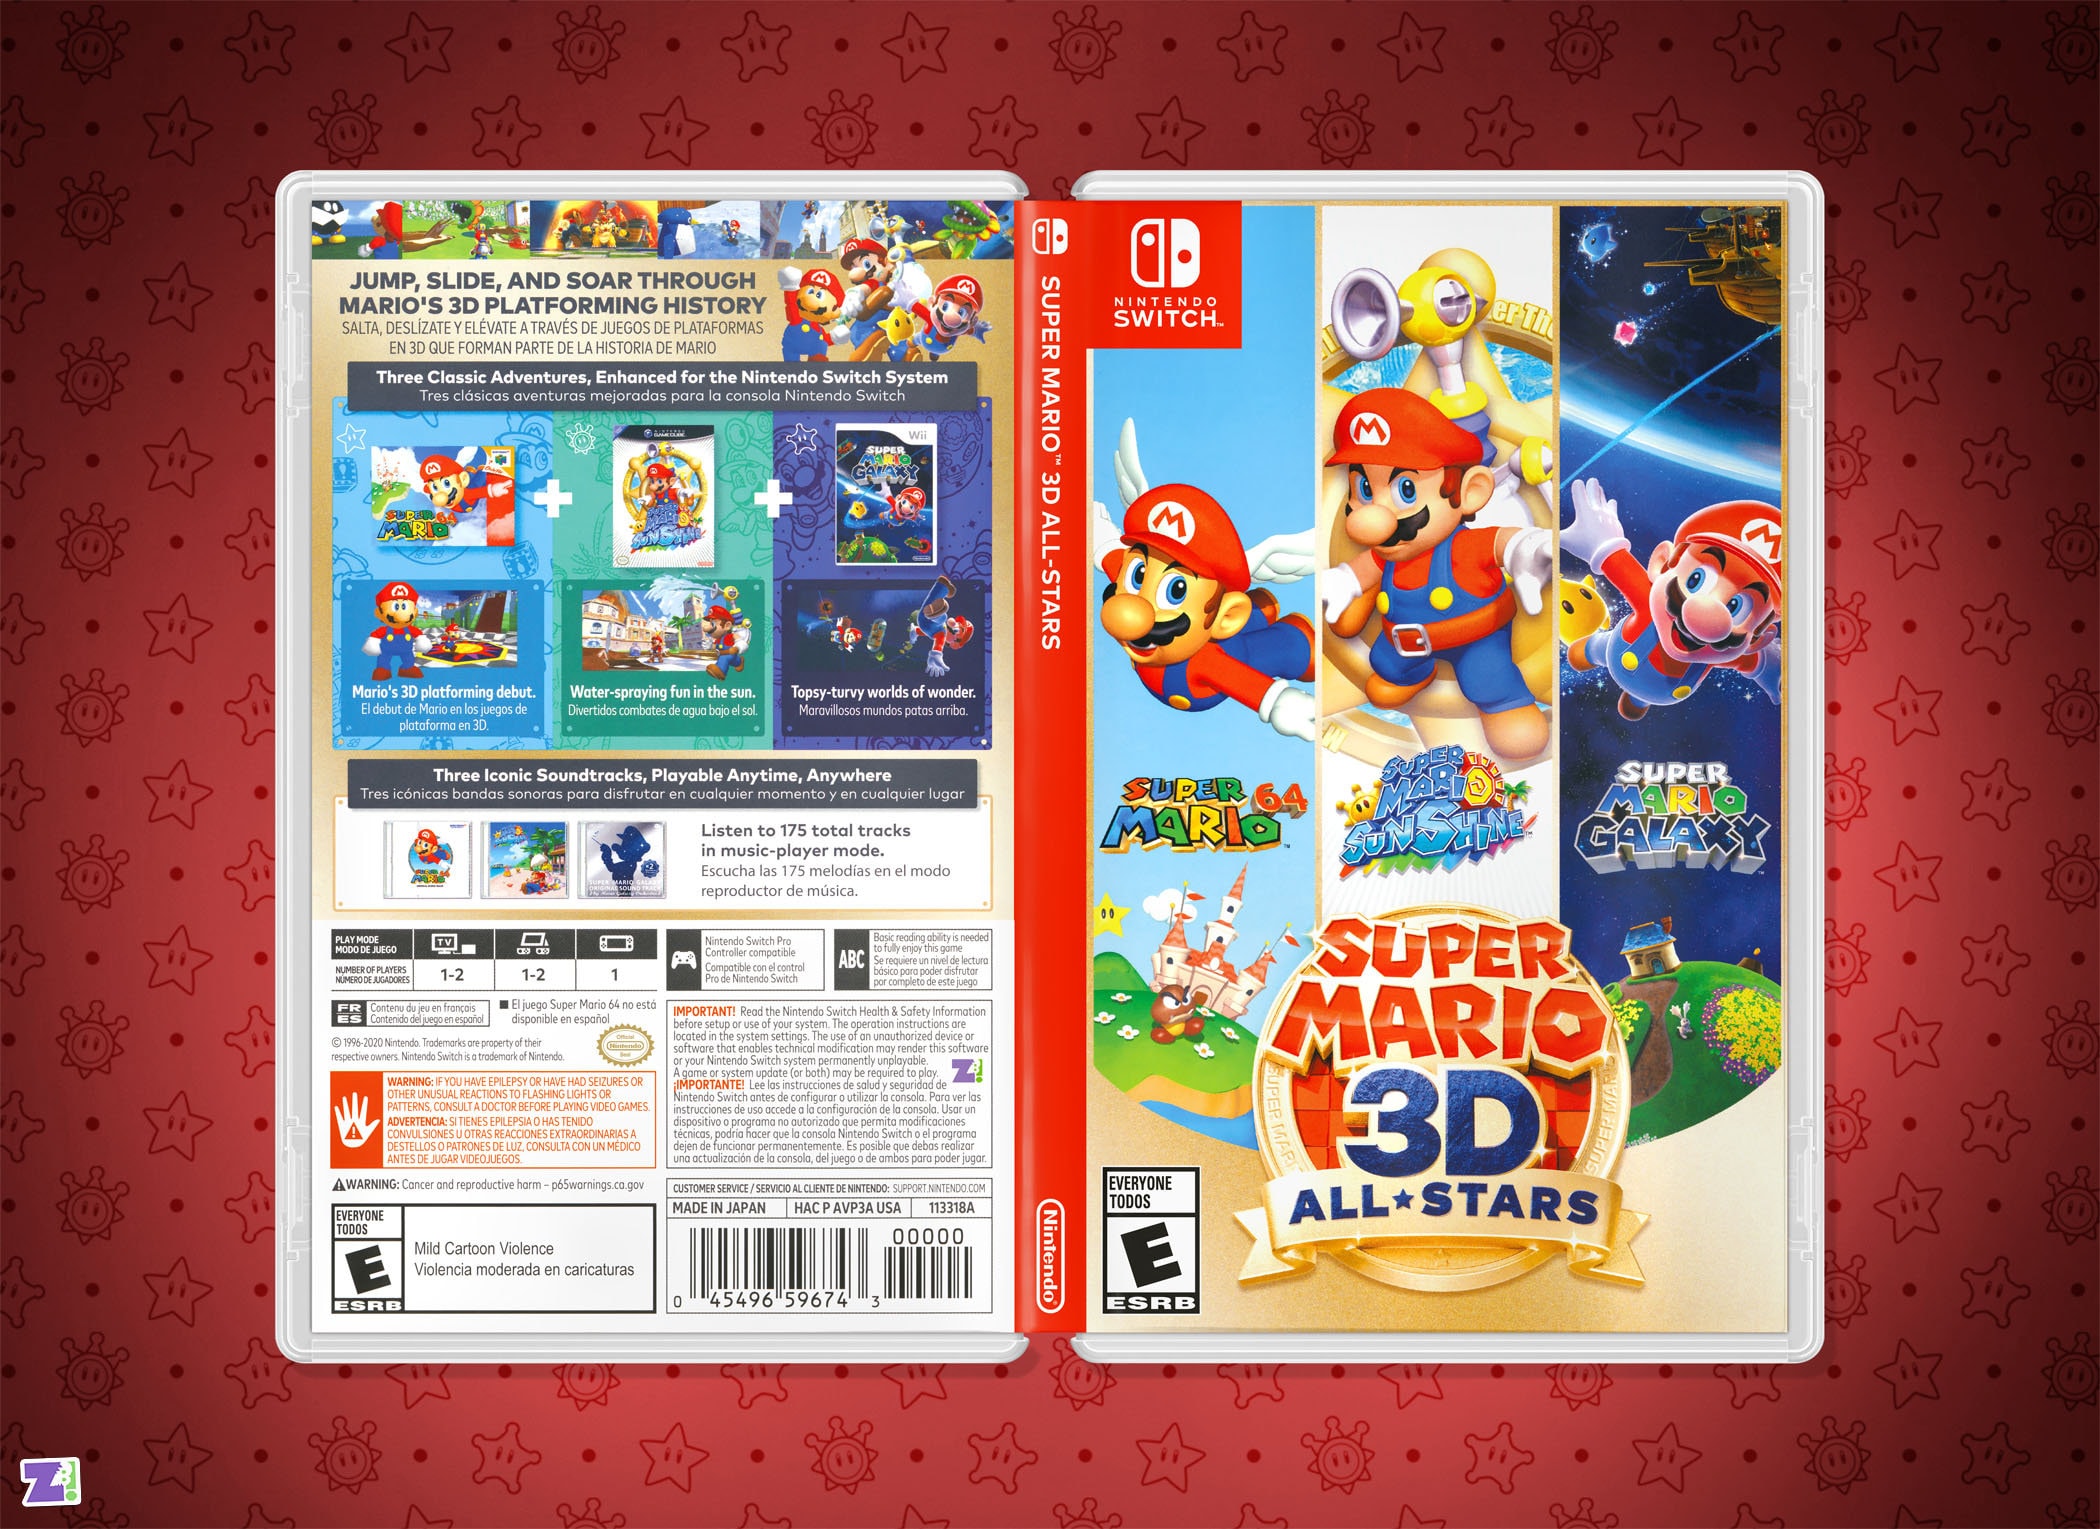 Super Mario All-Stars arrives on Nintendo Switch Online today